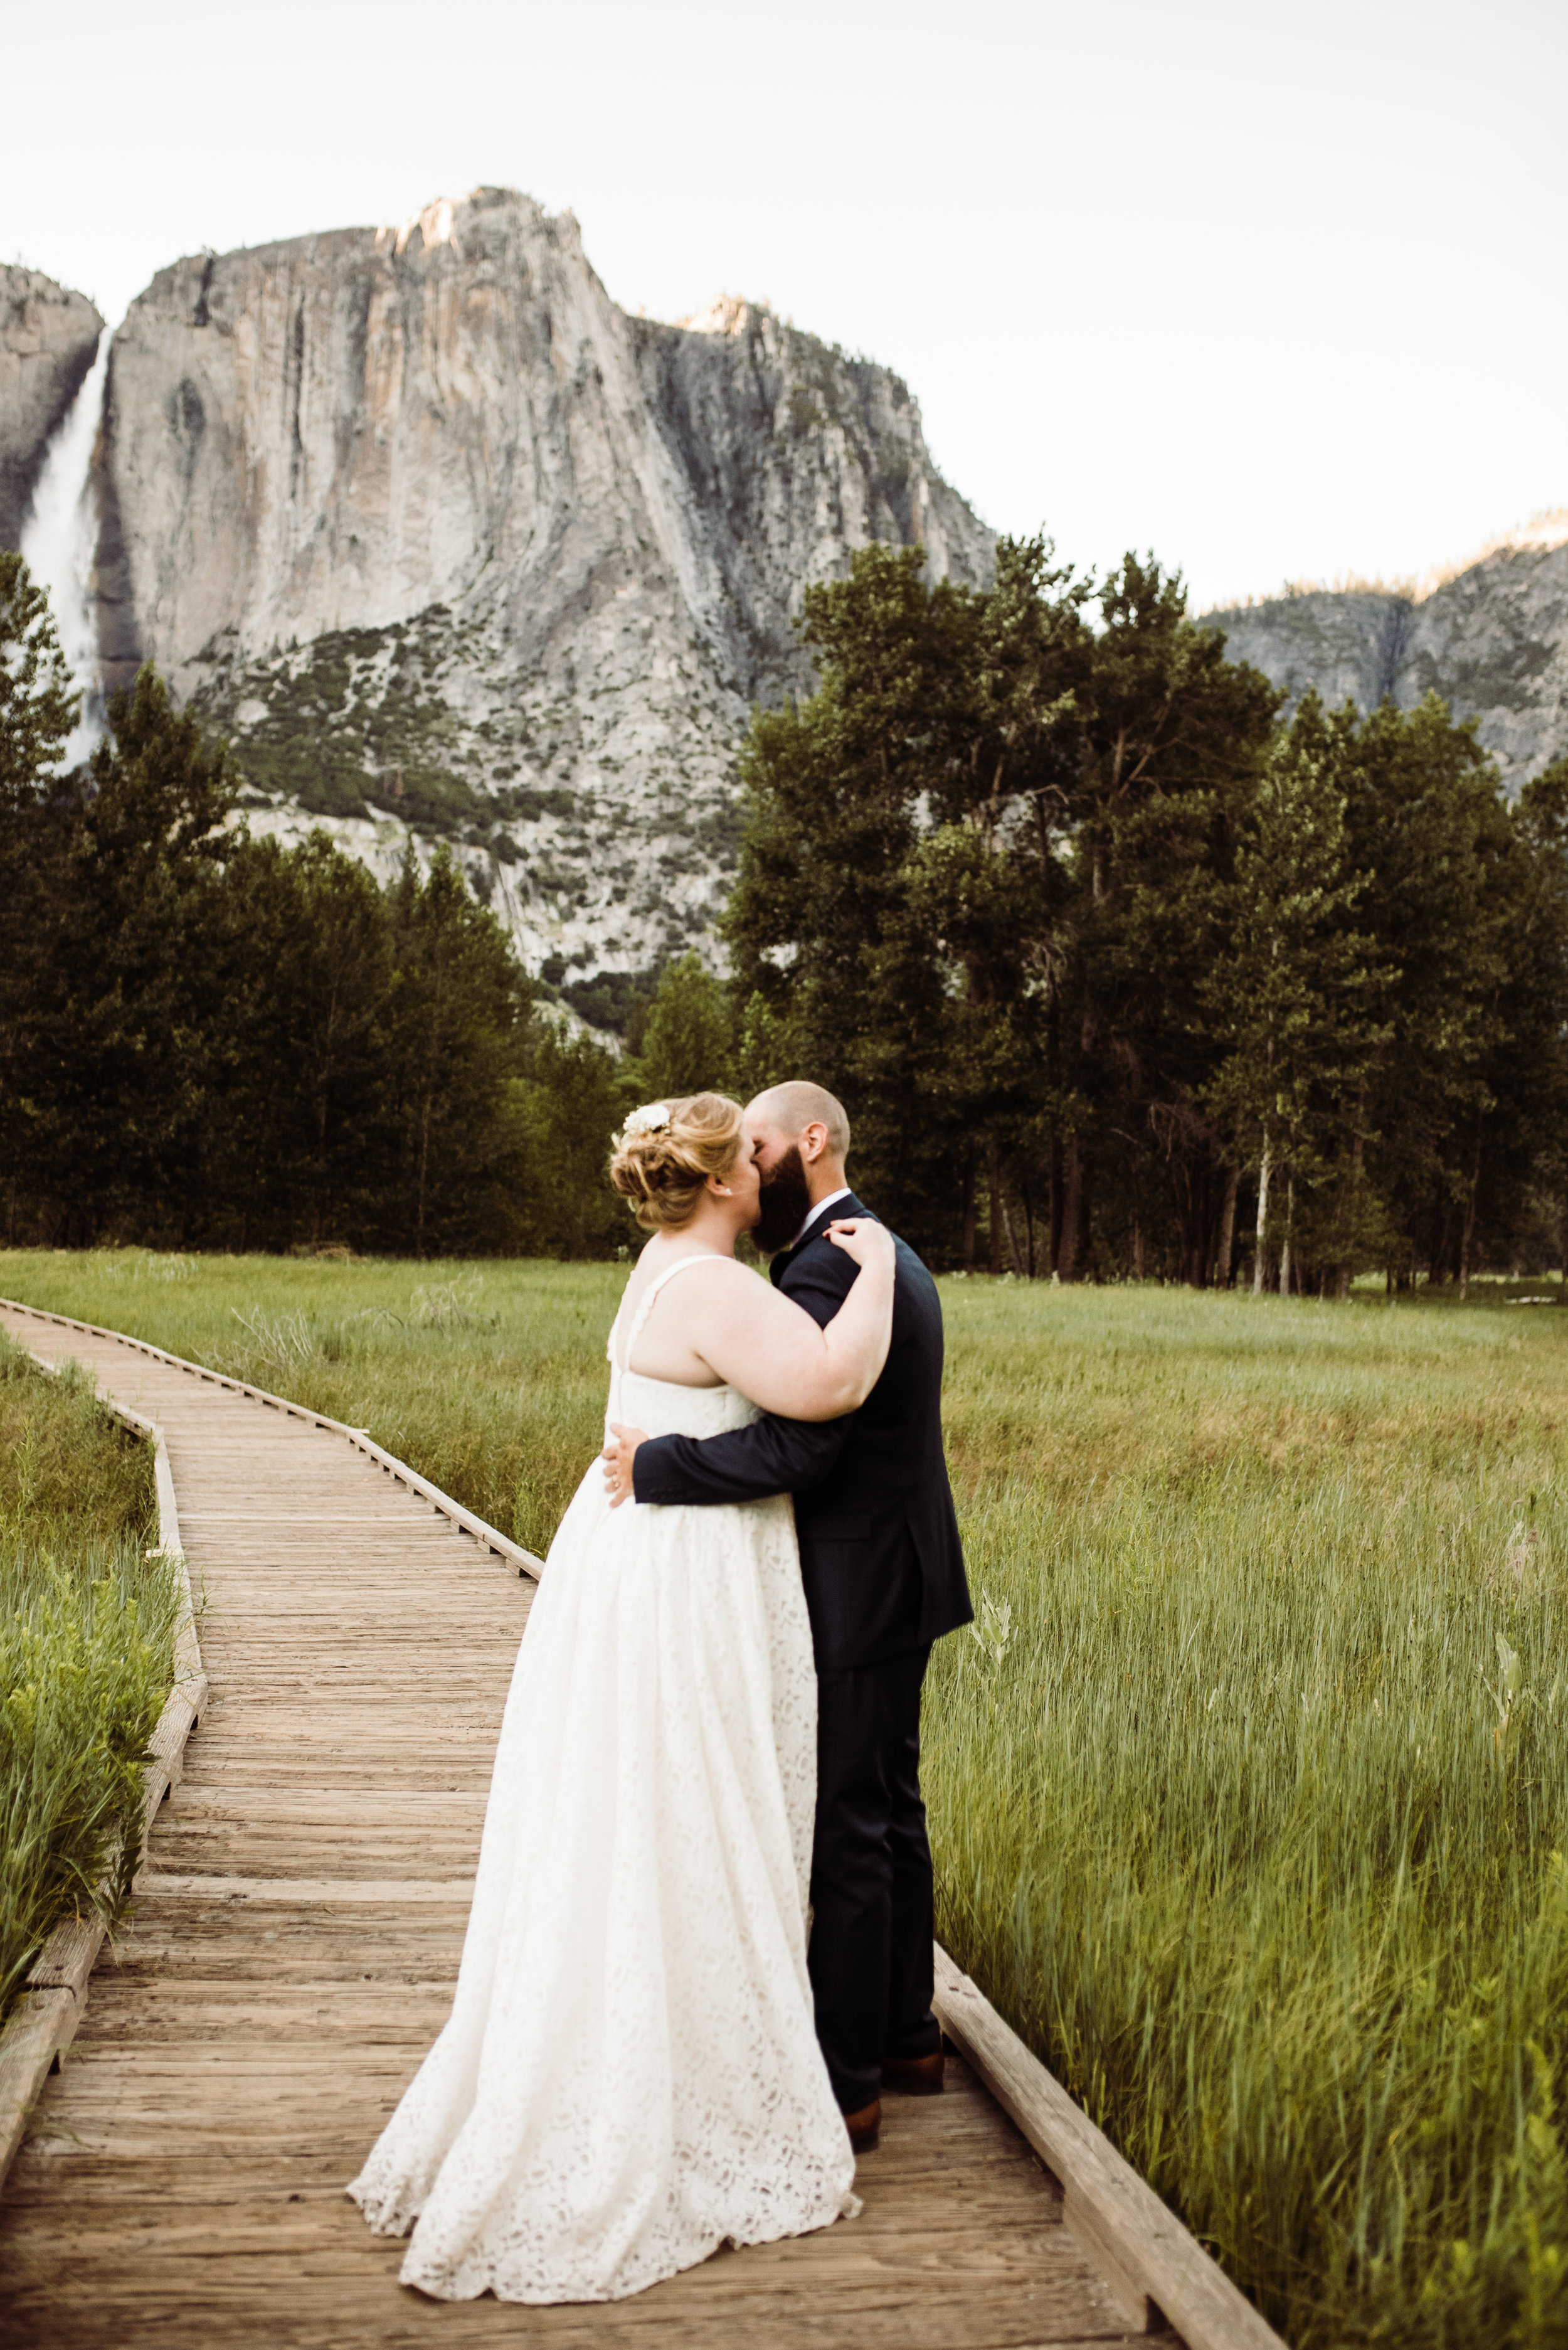 After the couple exchanged vows at Glacier Point, we took summery sunset photos in Yosemite Valley